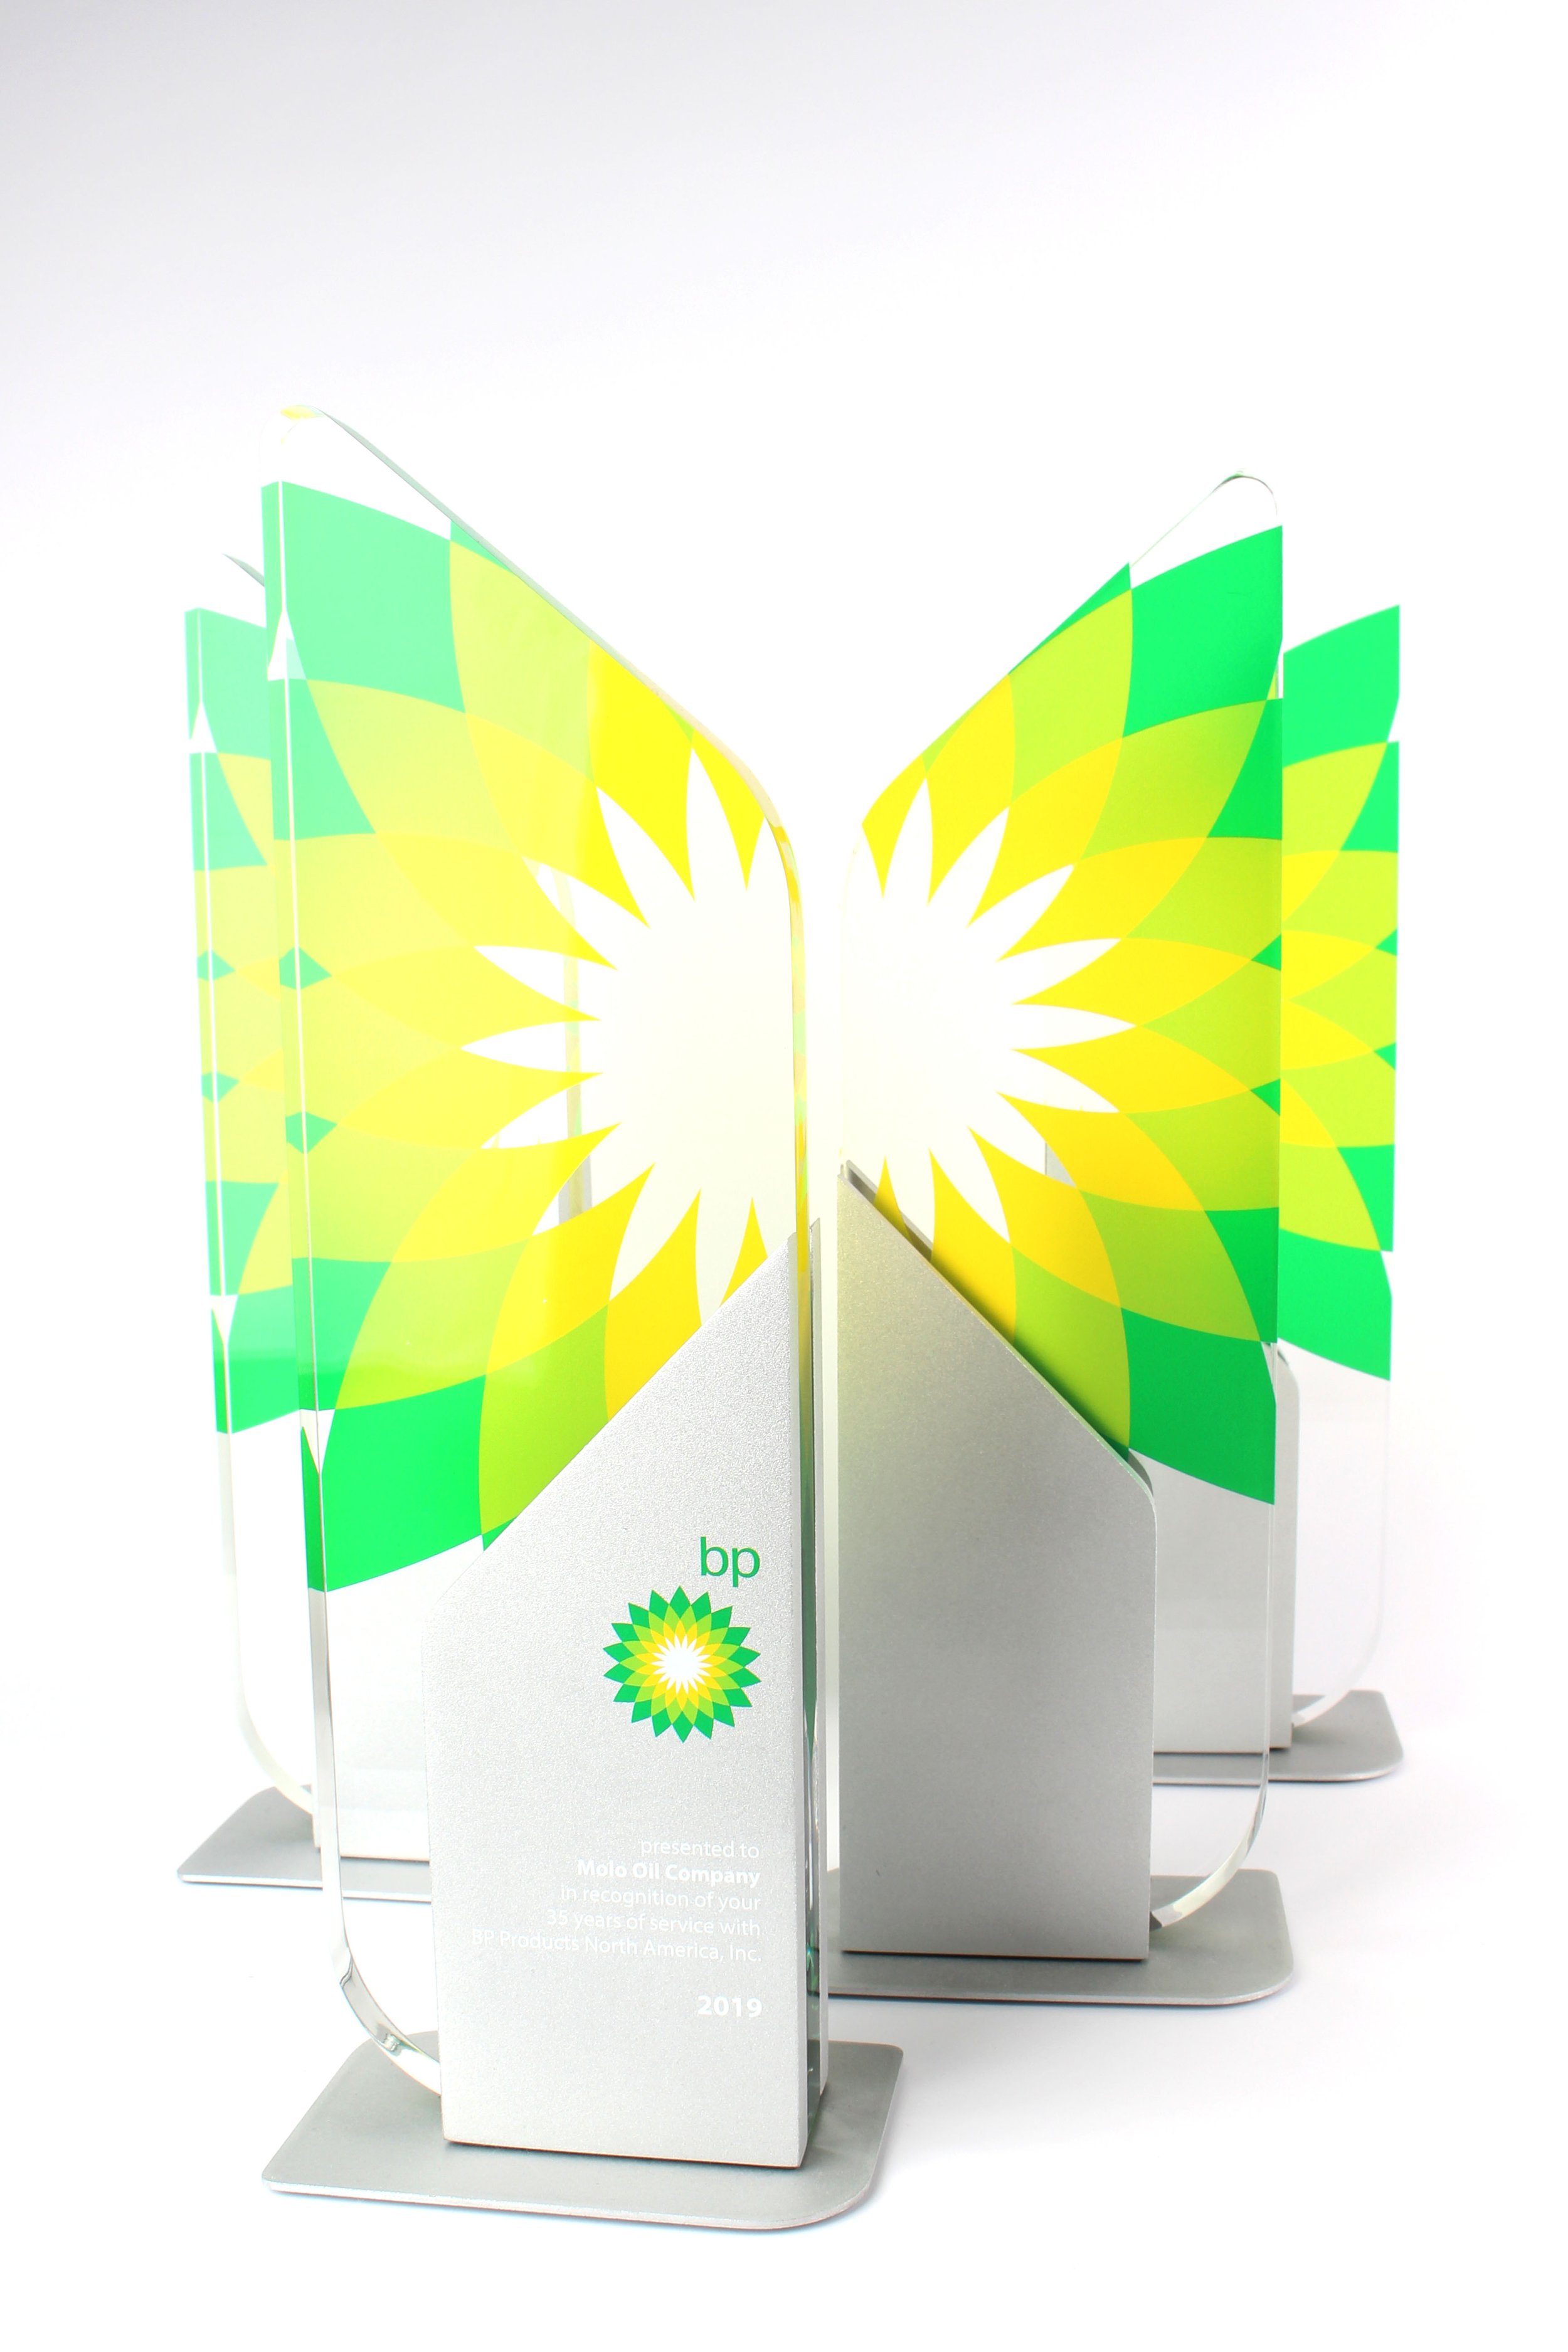 custom metal awards unique and modern design perfect for employee recognition and service awards 